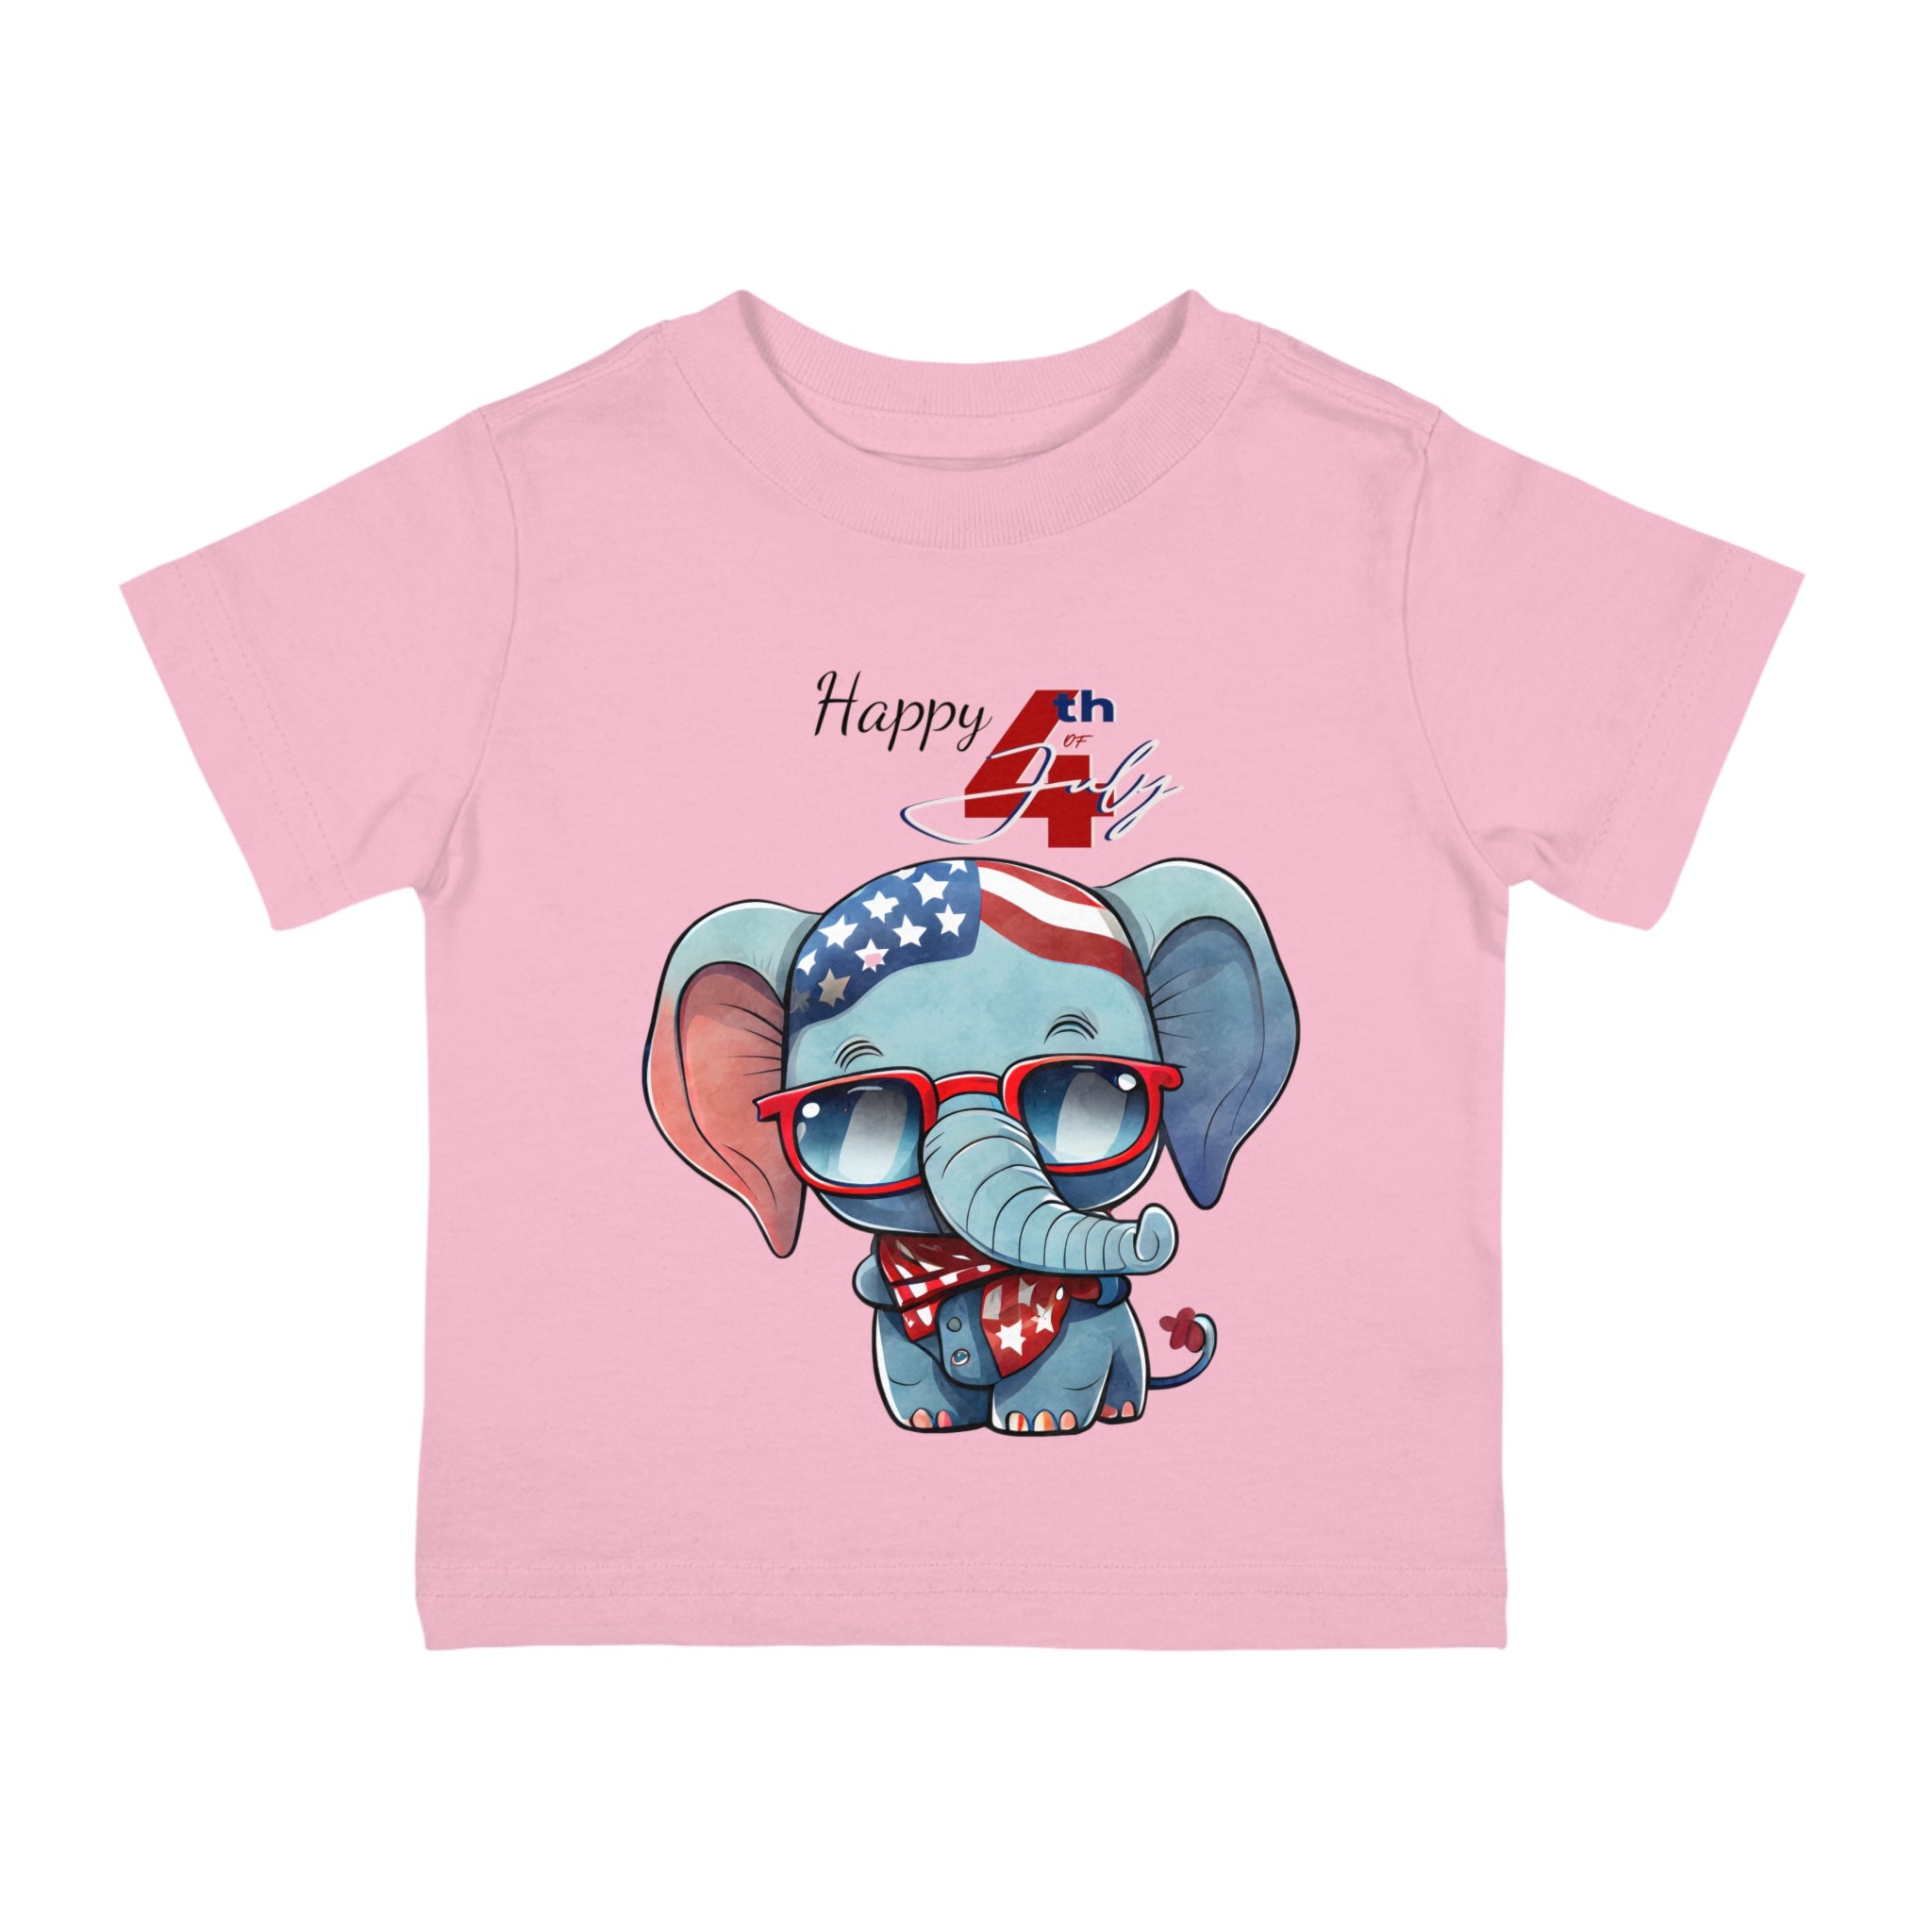 Happy 4th of July Elephant design Infant Shirt, Baby Tee, Infant Tee